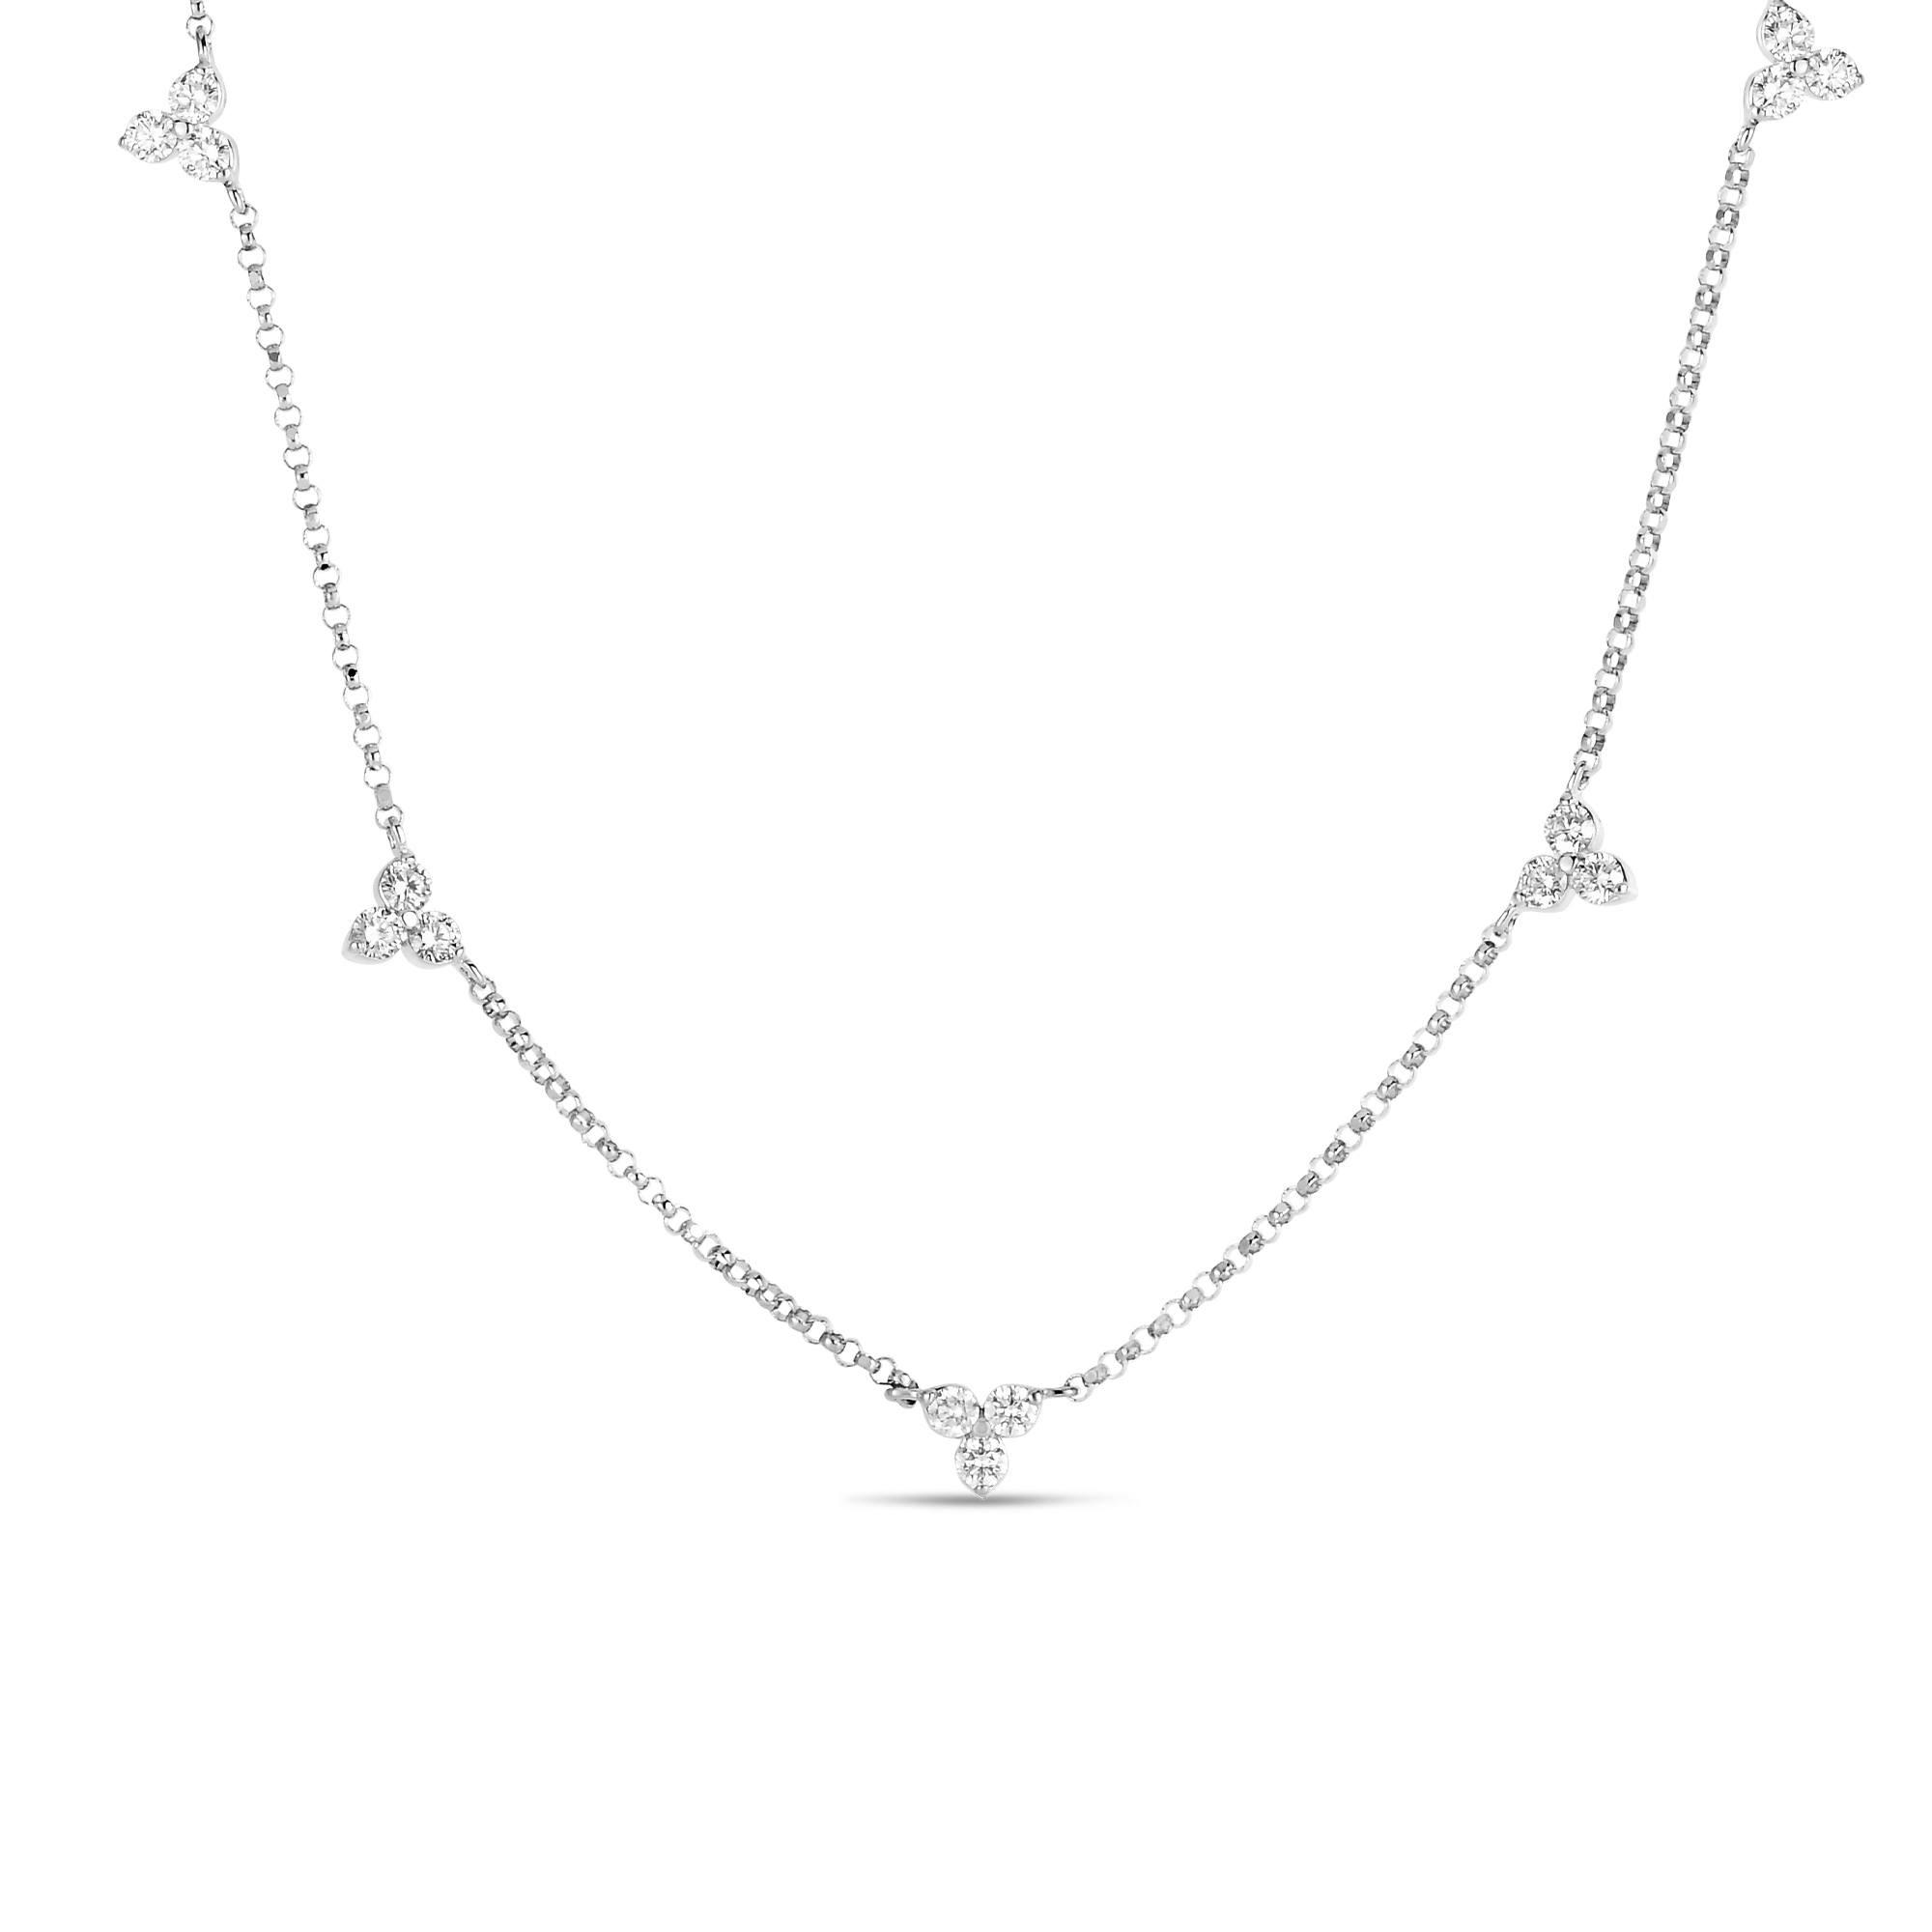 Roberto Coin Triangle Station White Gold Necklace 0